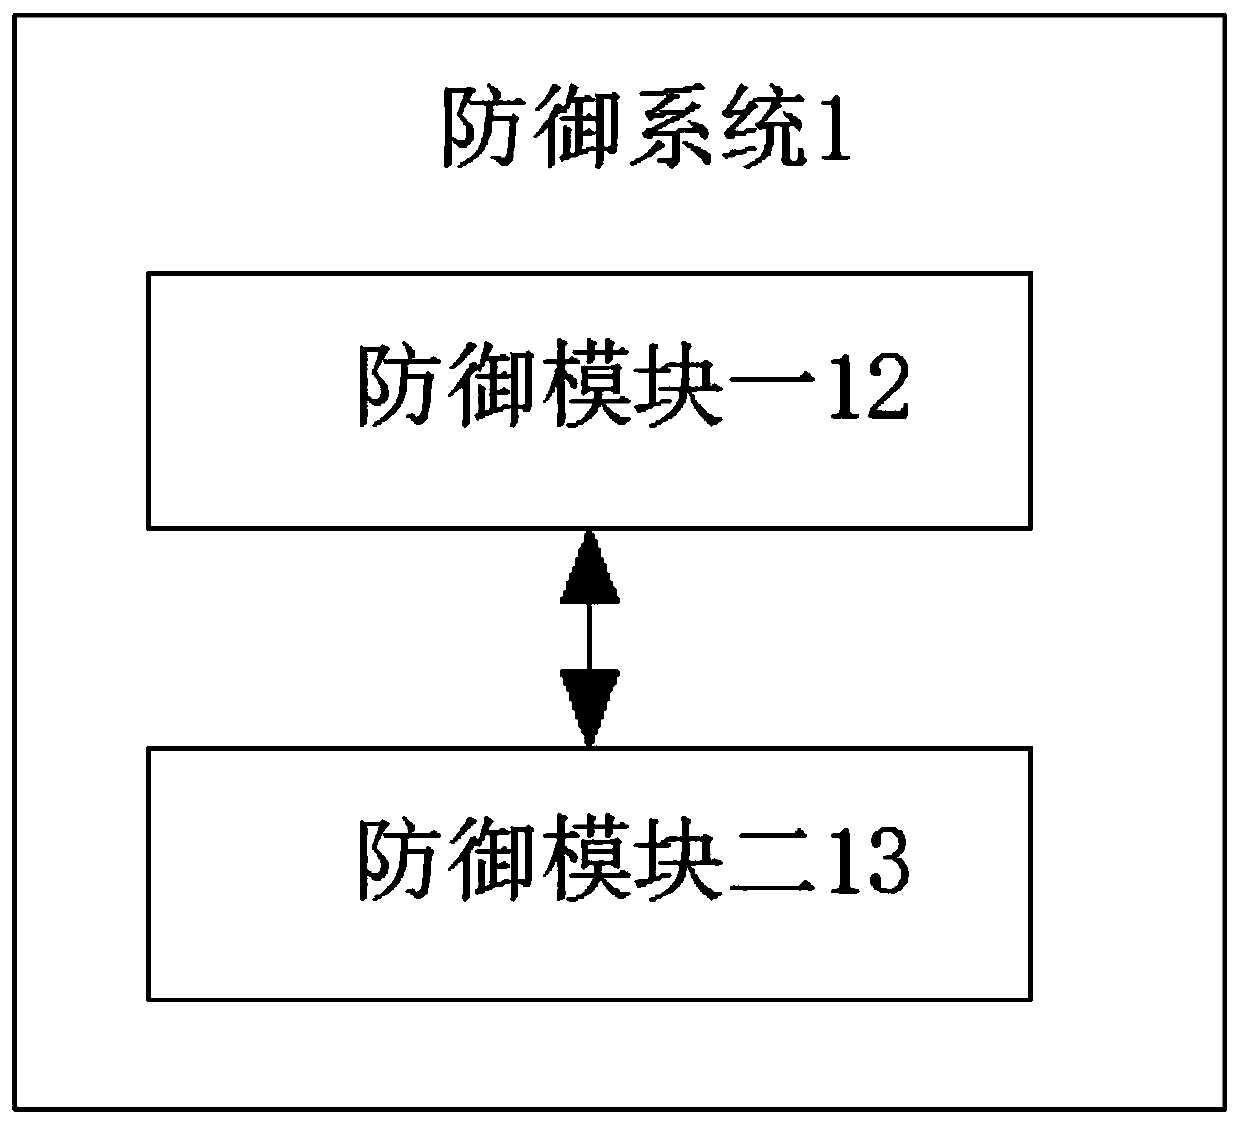 Cyberspace security situation awareness detection and analysis system and method